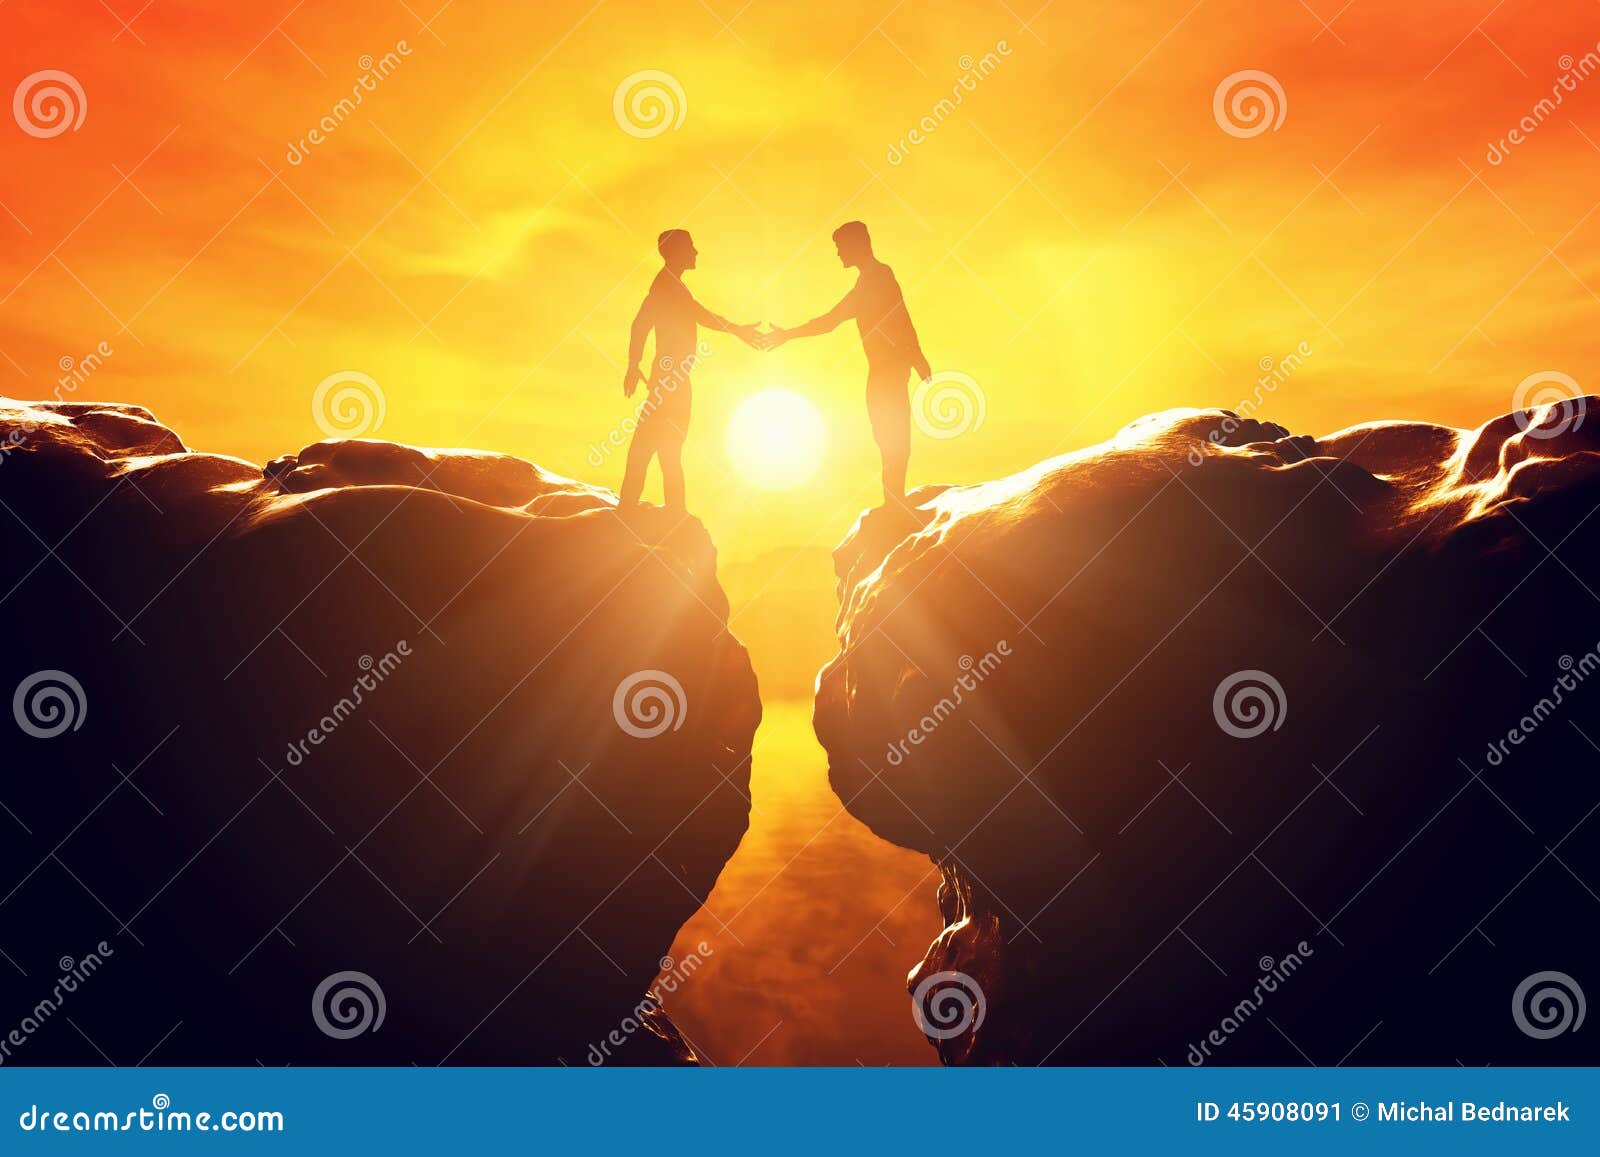 two men shake hands over precipice. business deal